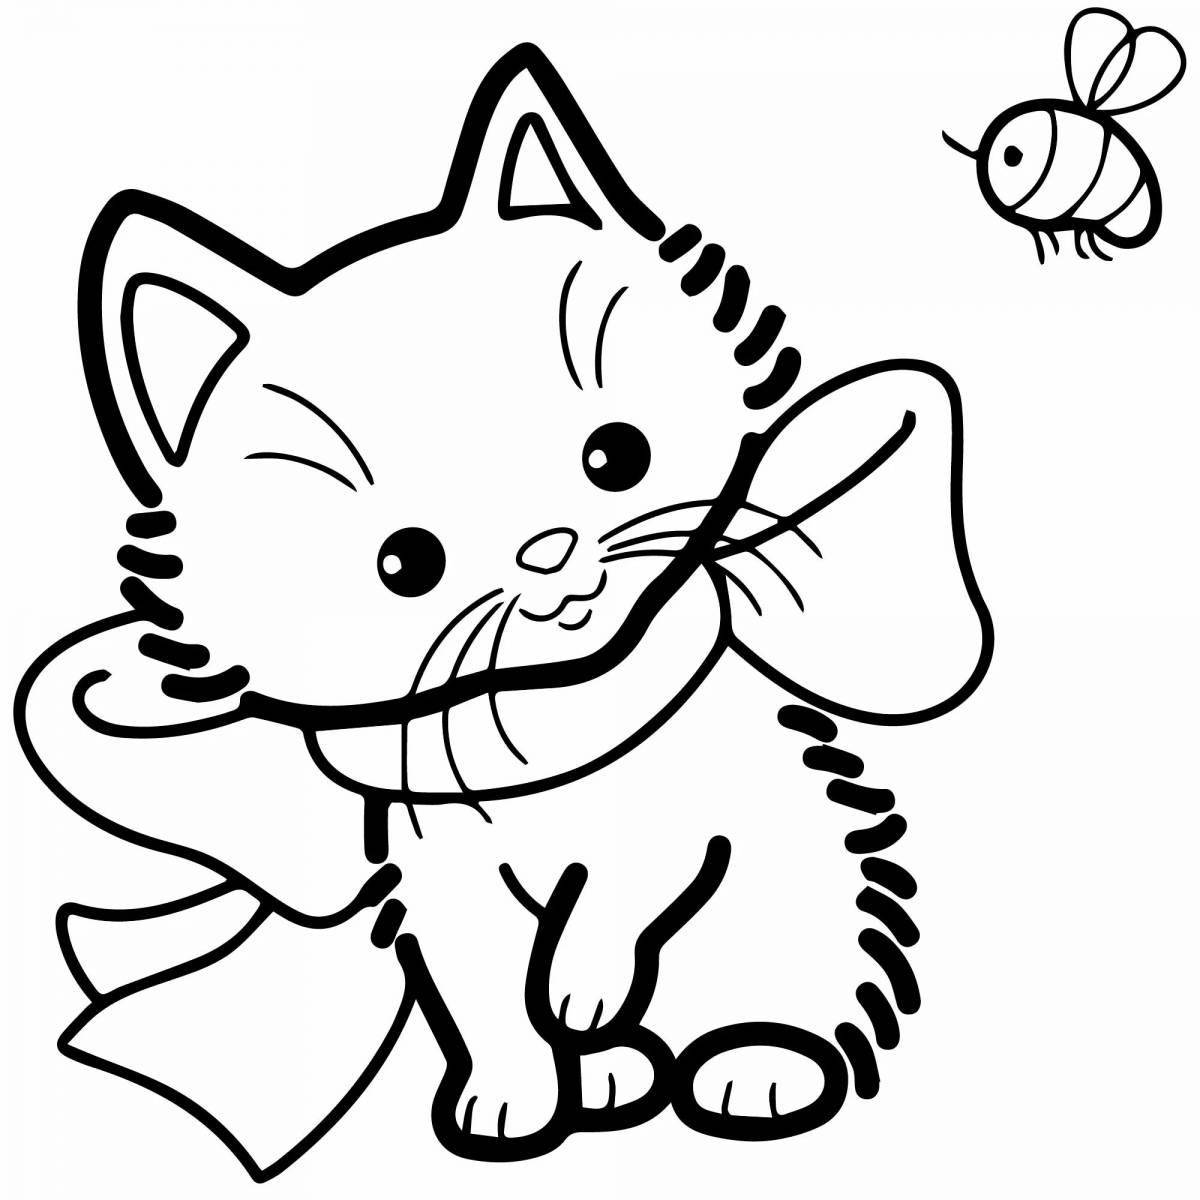 Kitty live coloring for children 5-6 years old